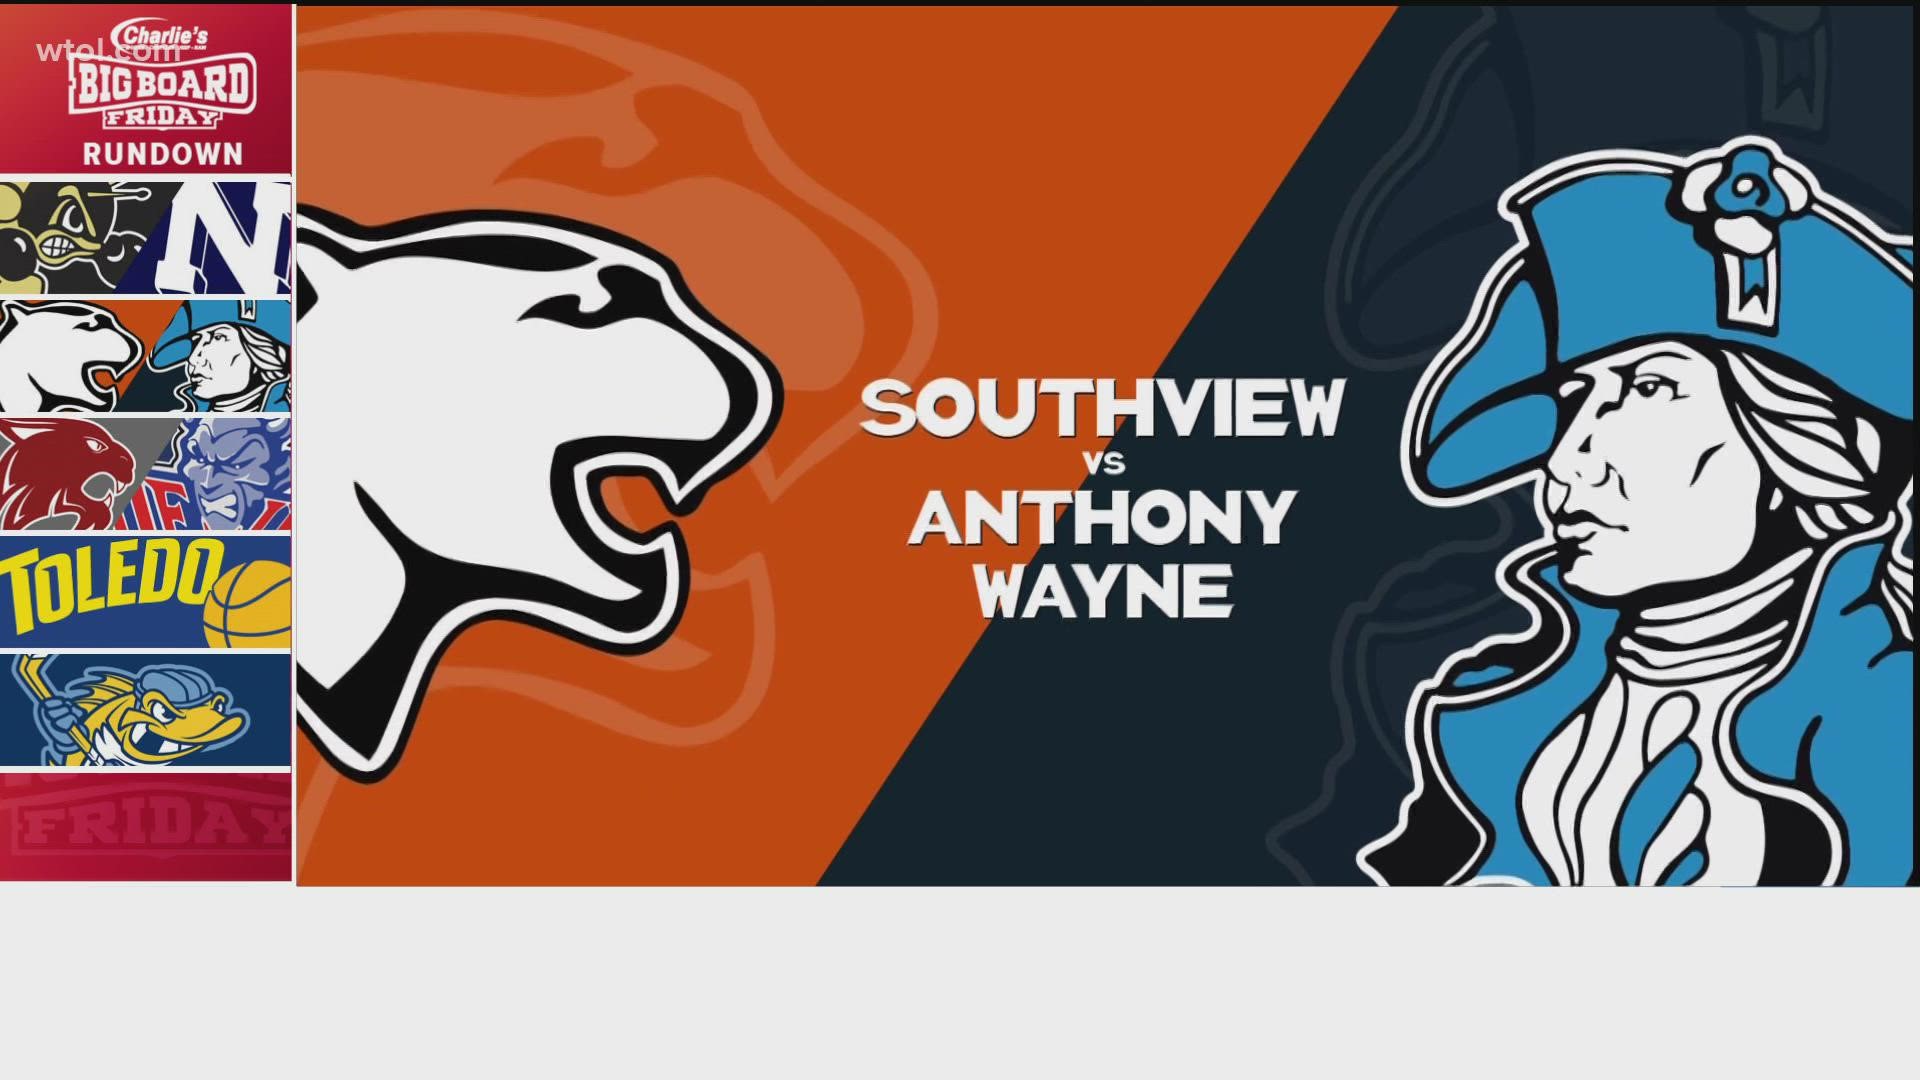 Anthony Wayne won big at home Friday night with a score of 52-20.